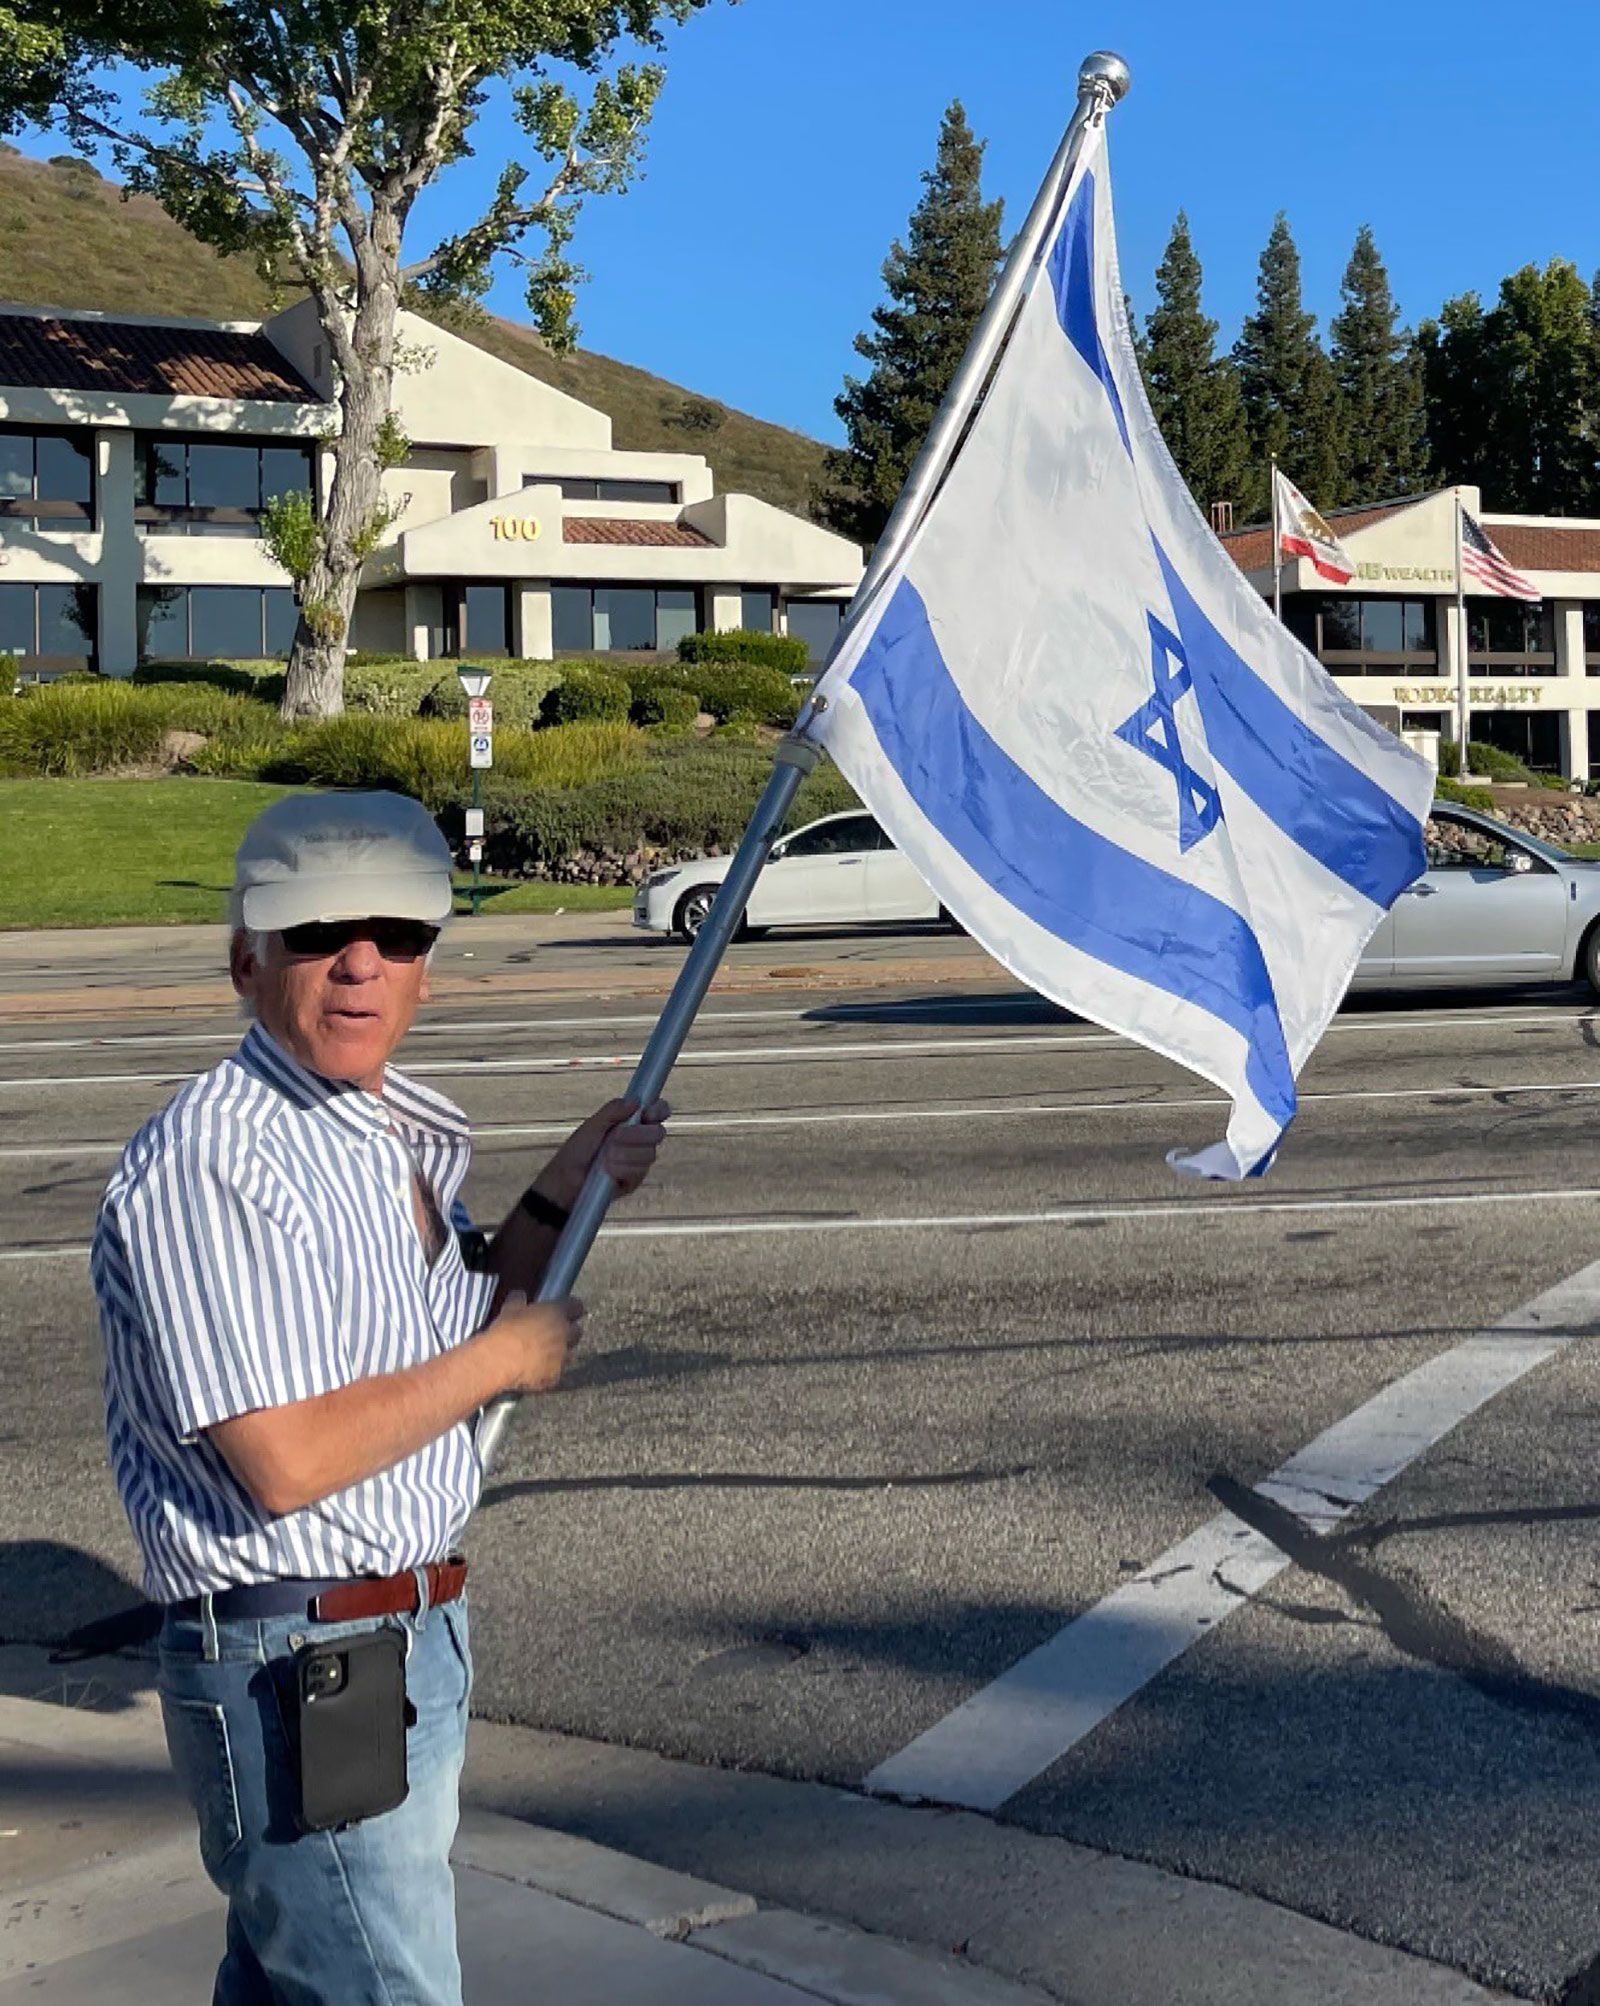 This photo, taken Sunday, shows Paul Kessler holding an Israeli flag at the intersection where the altercation would later take place.